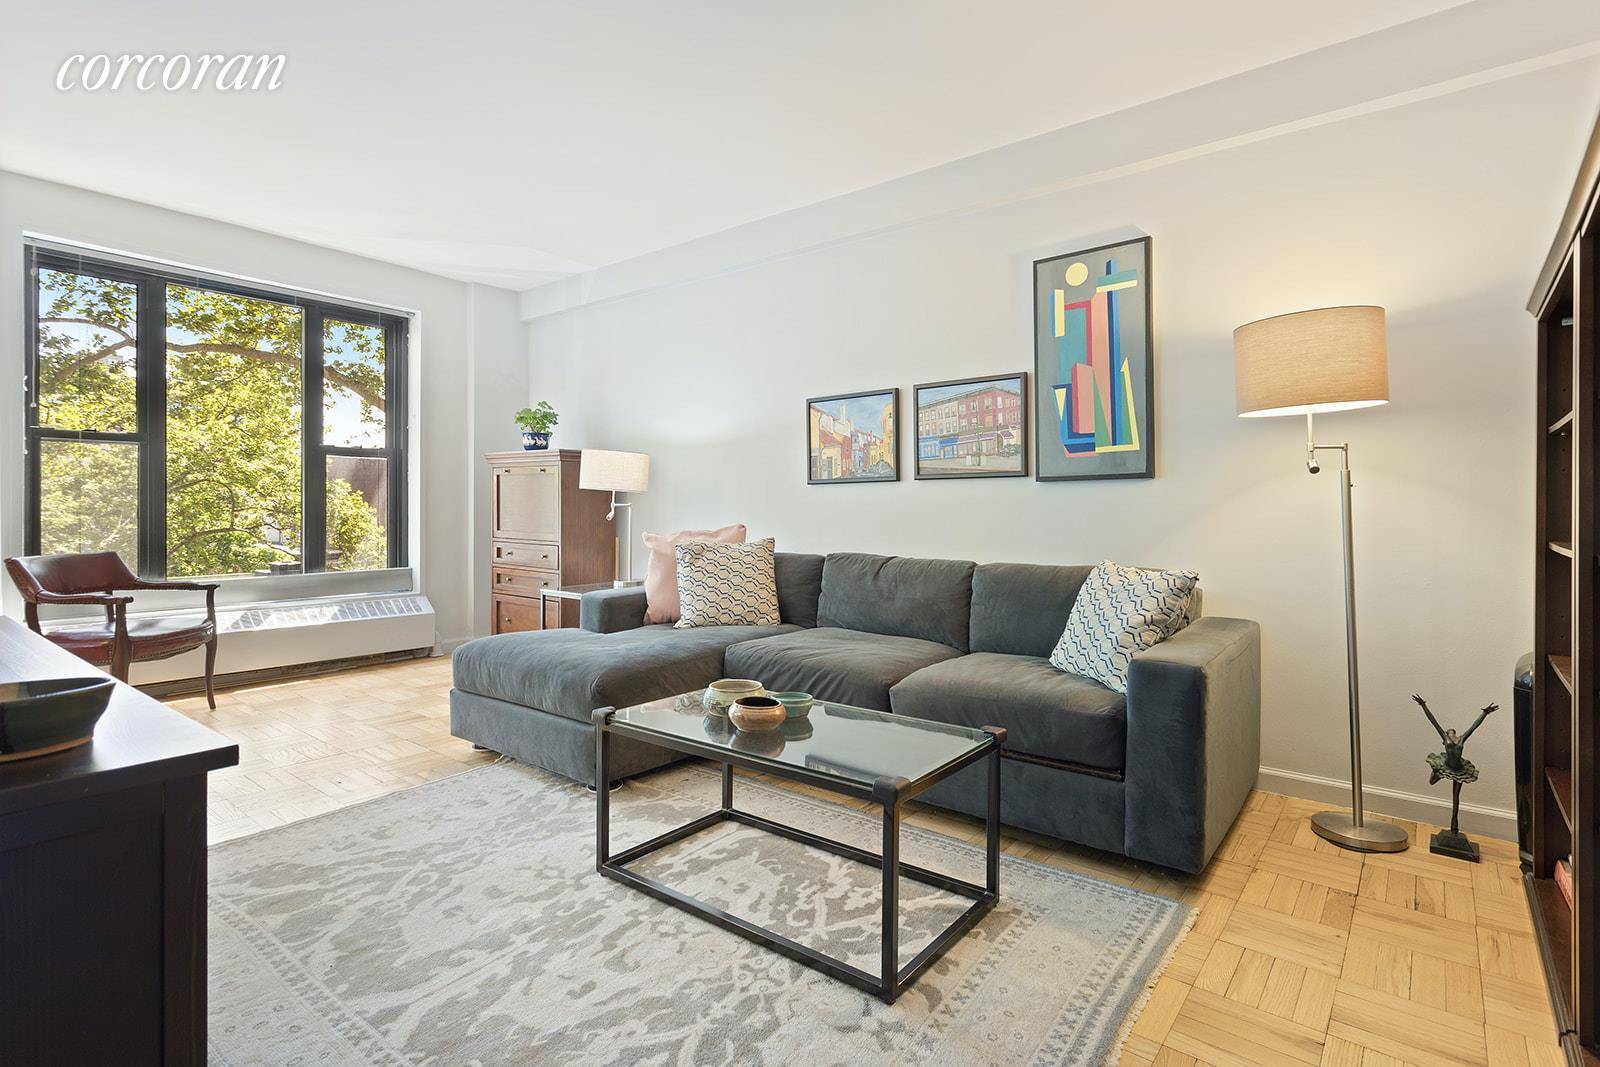 This extra large, renovated home has two exposures with brand new oversized windows framing treetop views of historic Clinton Hill.